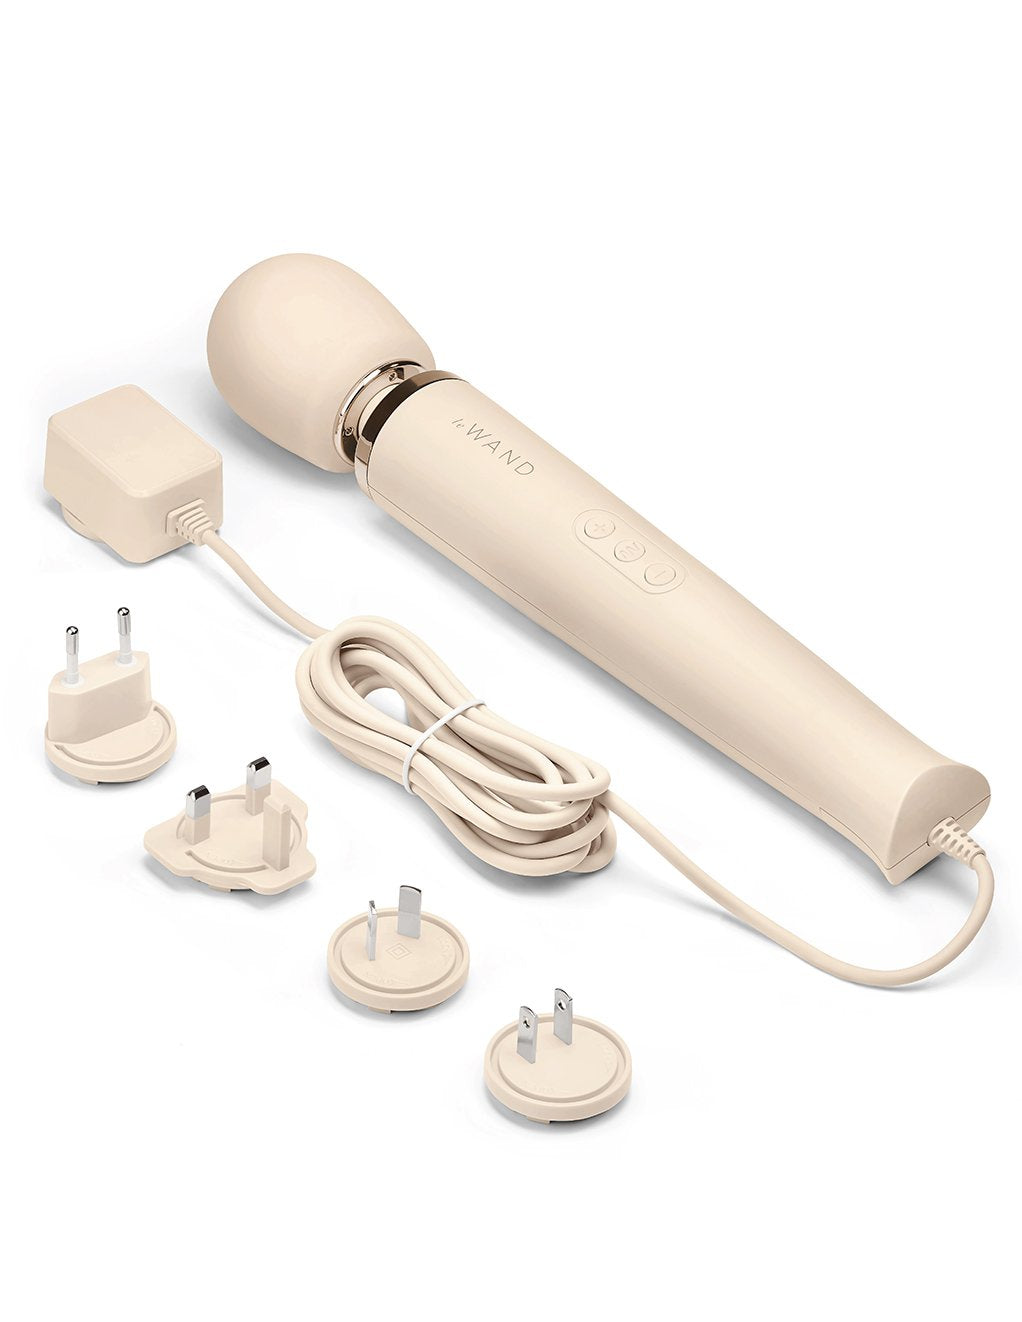 Le Wand Plug-In Vibrating Body Massager with 8 Foot Cord- Cream- Box Contents